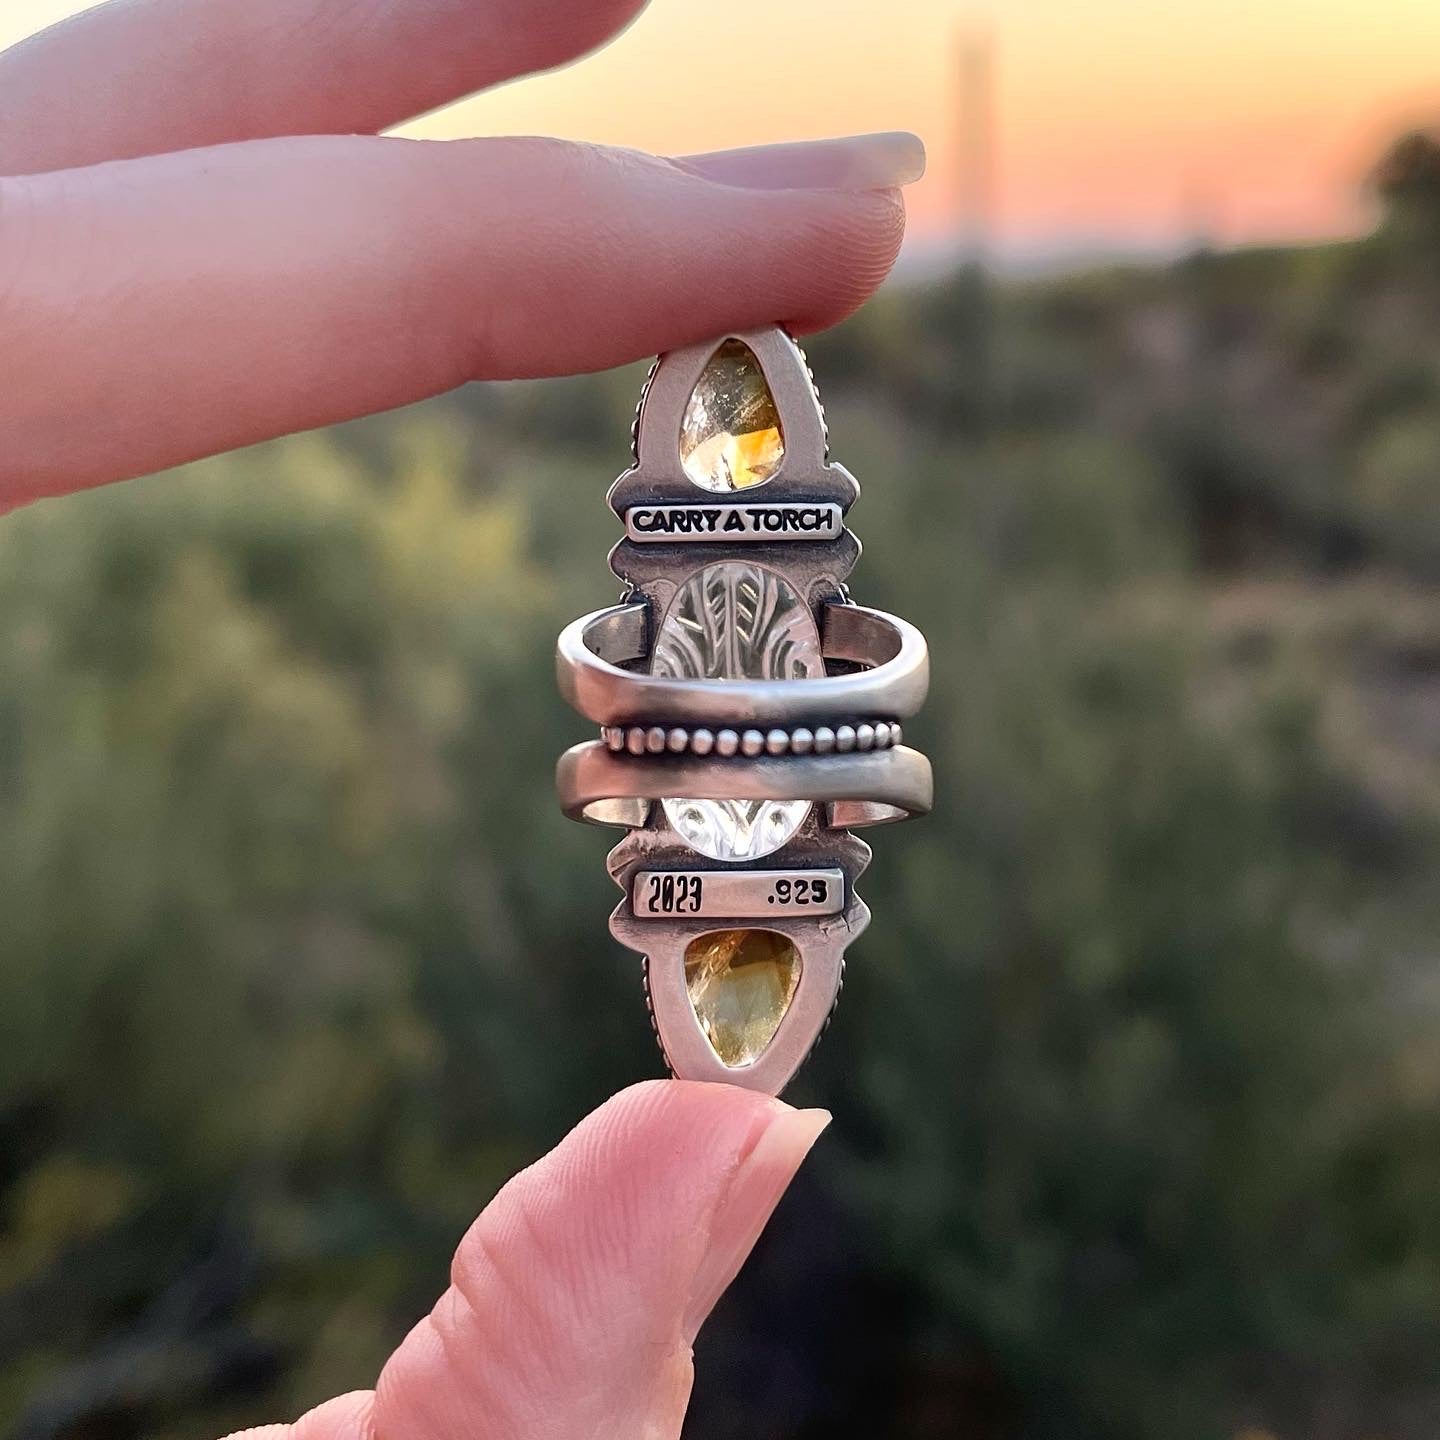 Carved Himalayan Quartz Stack Stone Ring // Size 8 (fits like a 7.5)